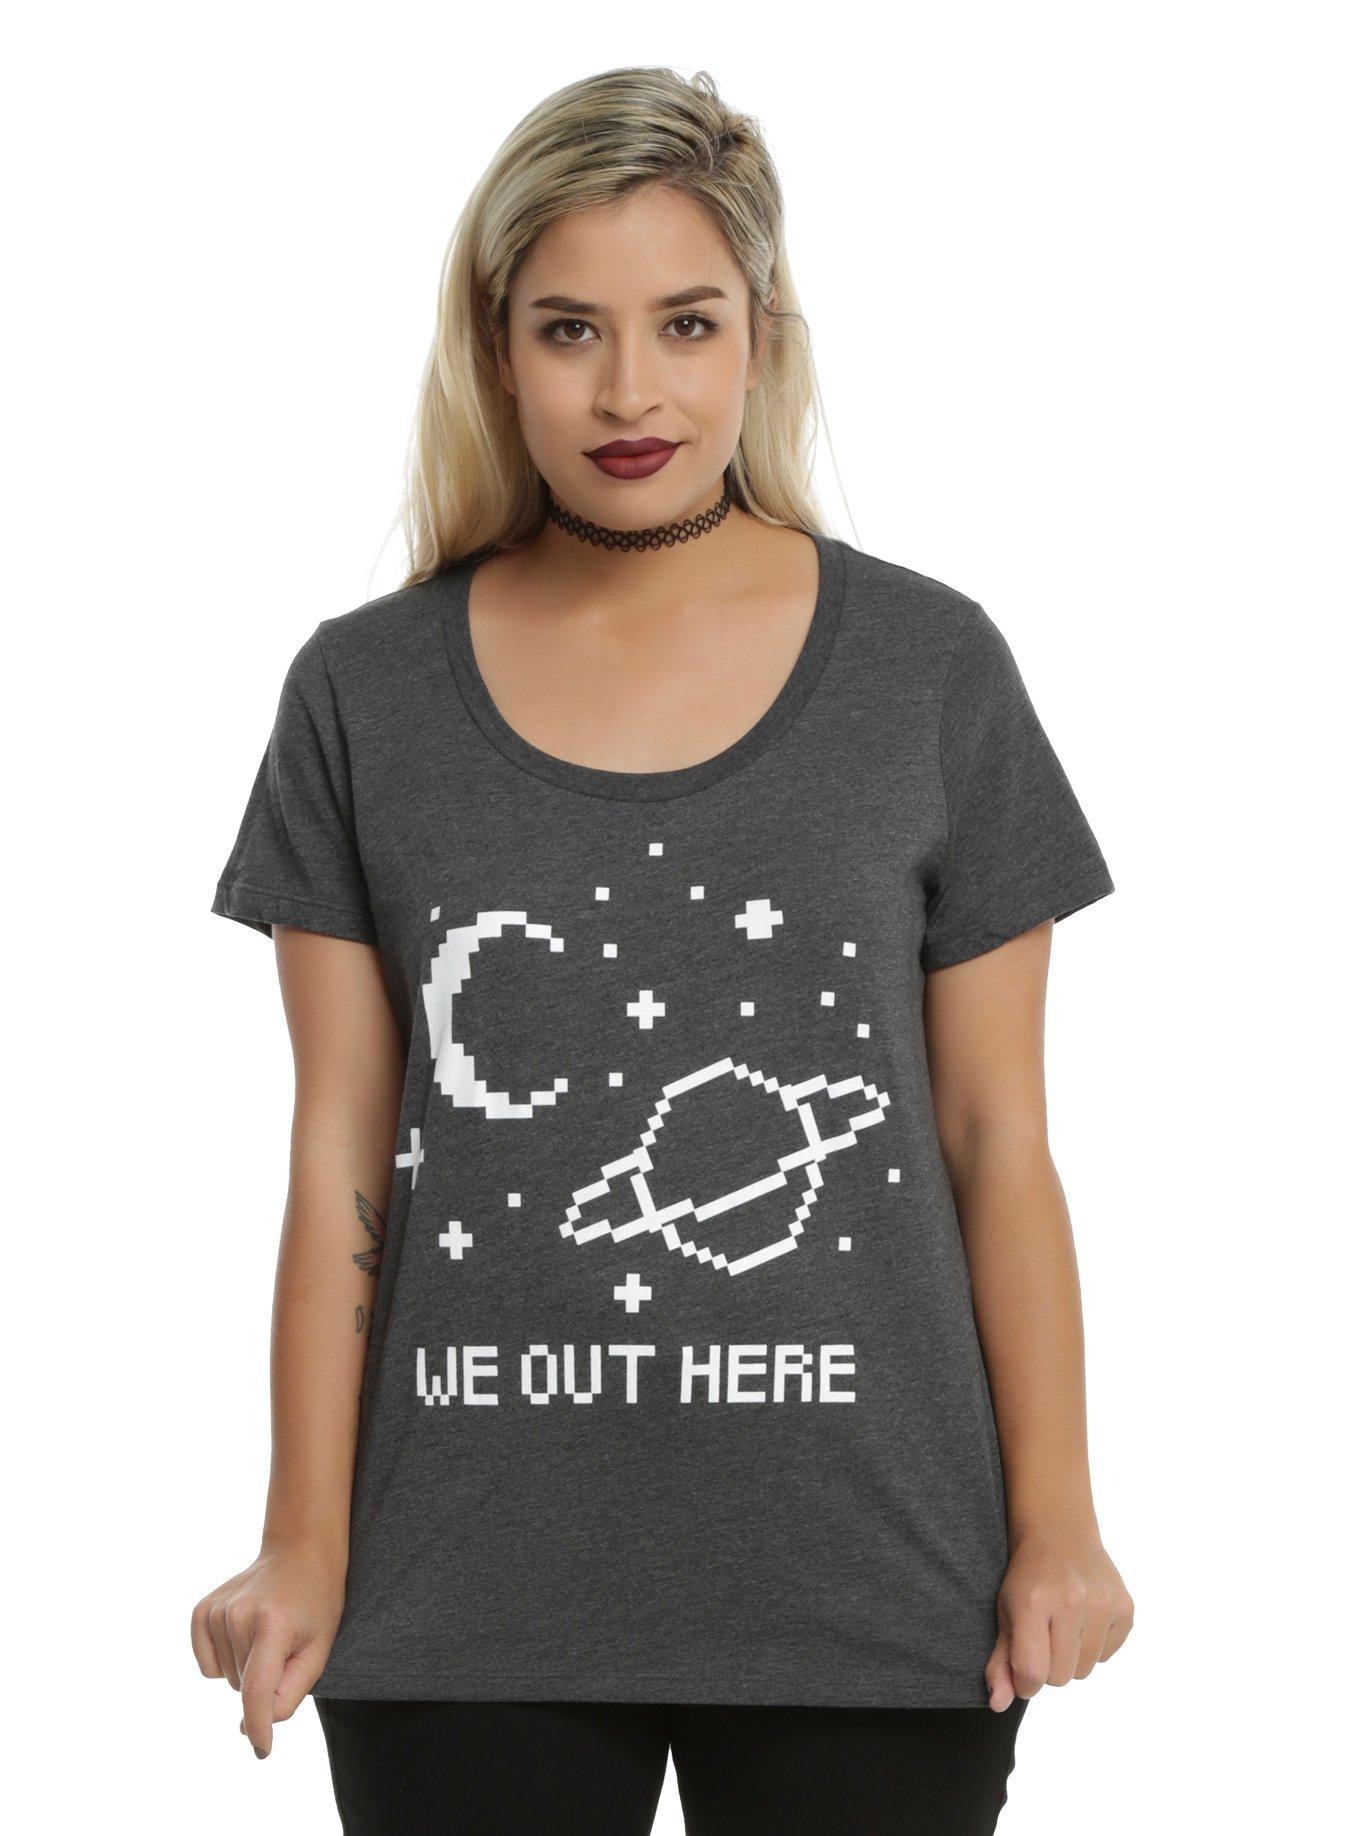 We Out Here Girls T-Shirt Plus Size, BLACK, hi-res